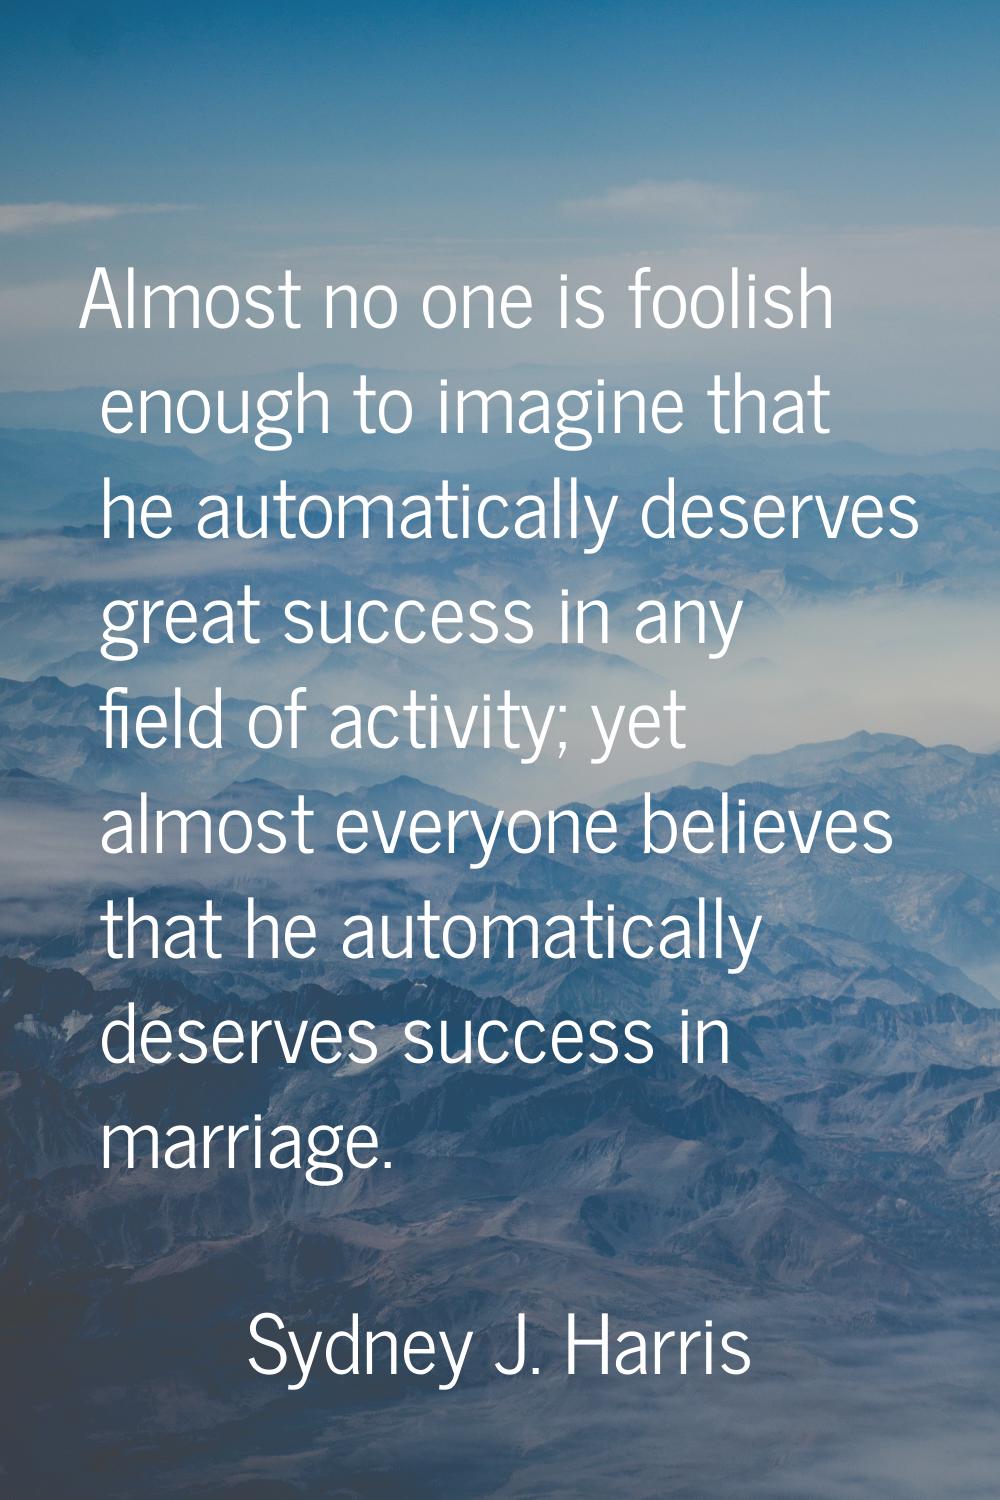 Almost no one is foolish enough to imagine that he automatically deserves great success in any fiel